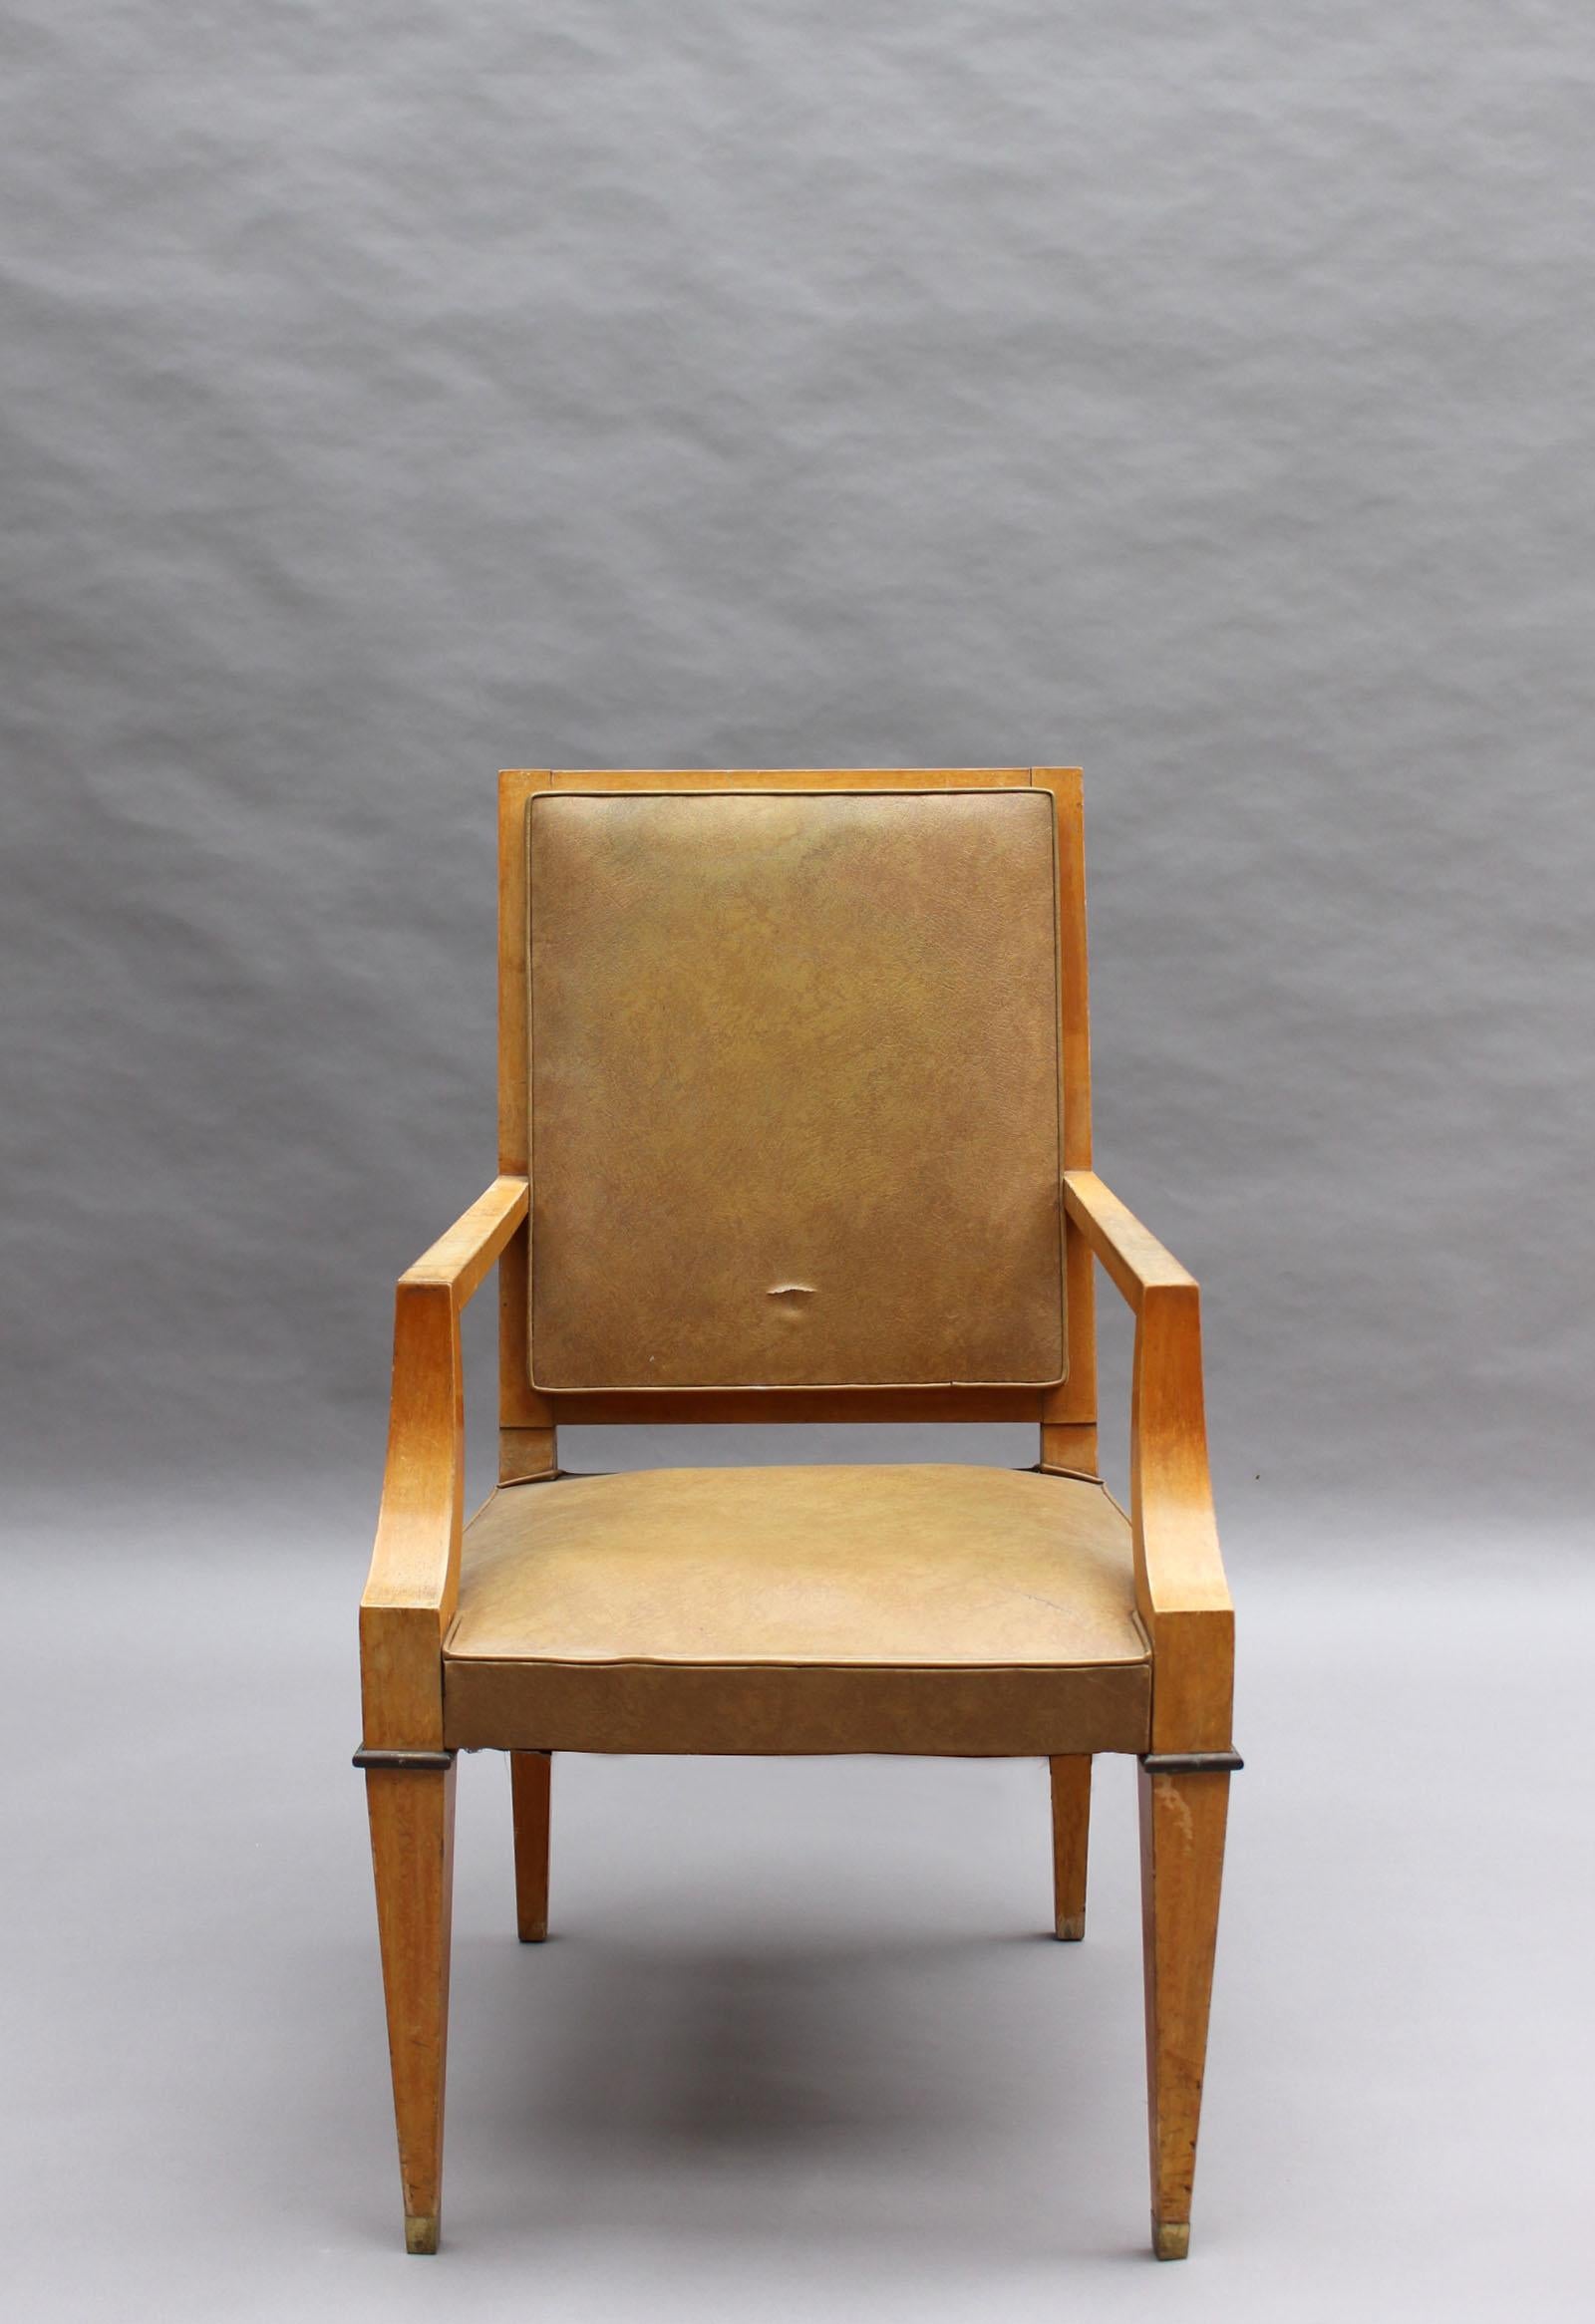 A fine French 1930s desk chair in solid maple with bronze details.